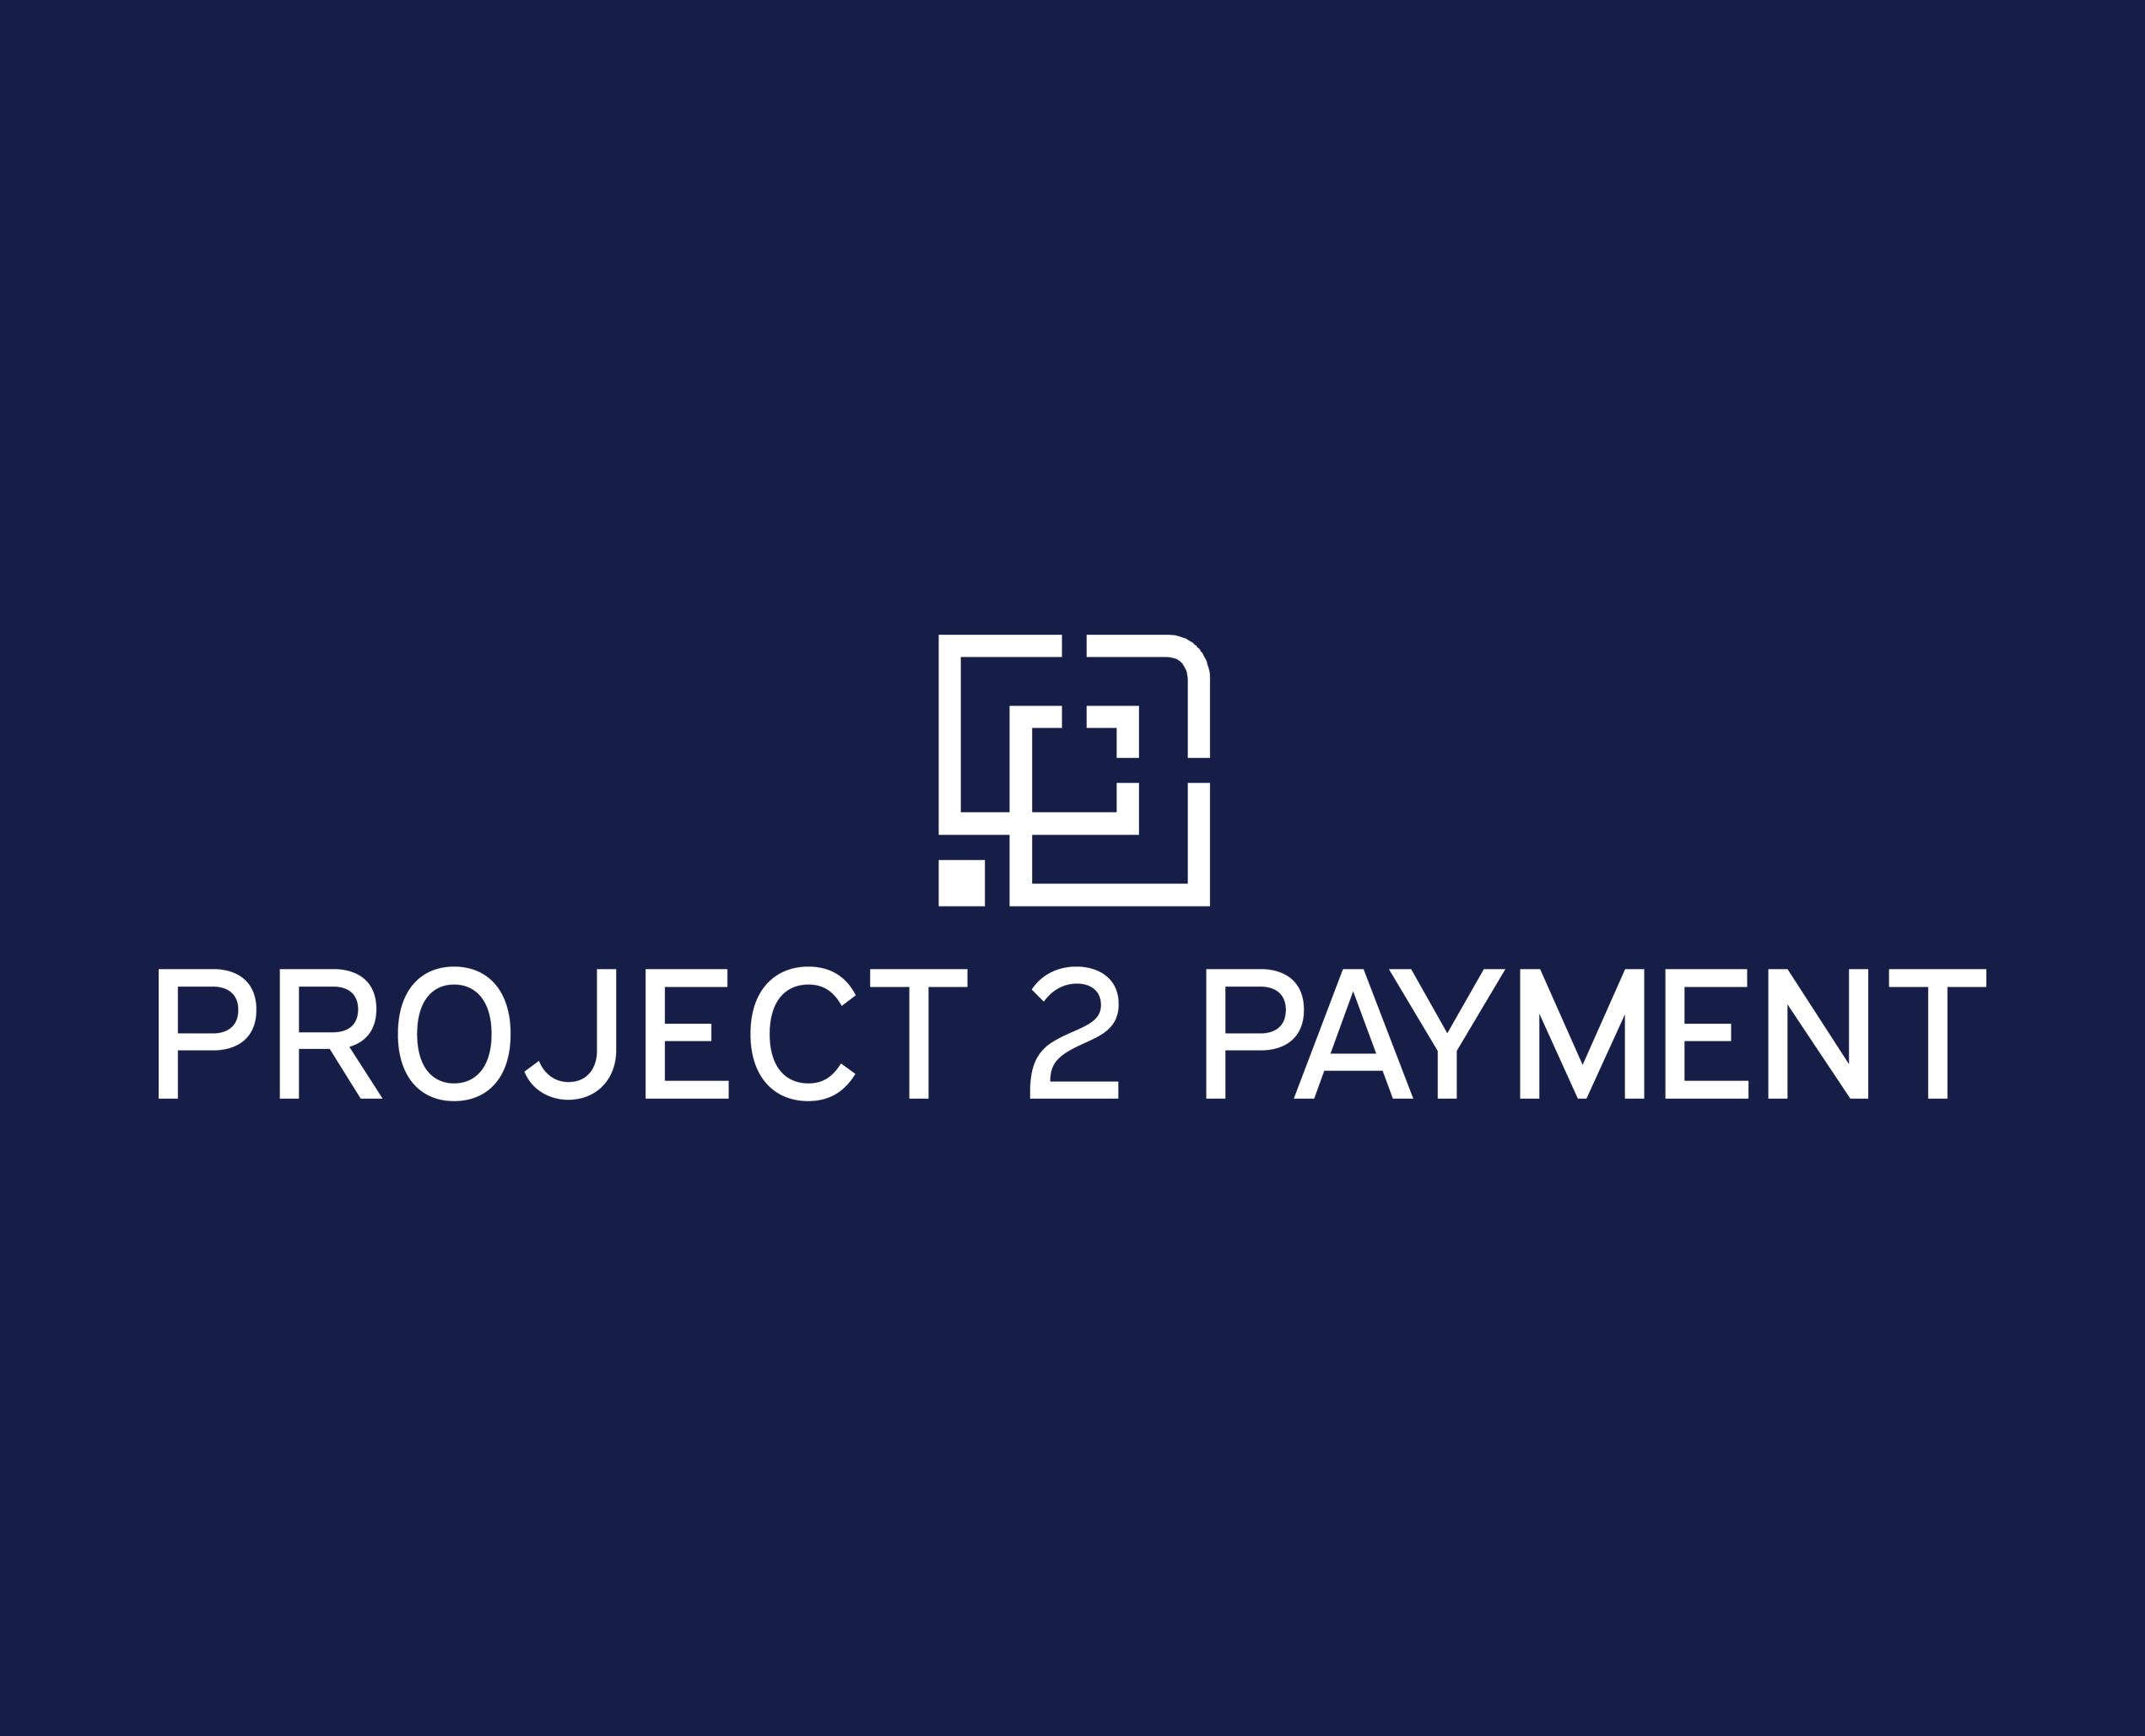 New Project 2 Payment Release Offers Contractors and Small Businesses the Easiest Way to Receive Payments Online thumbnail